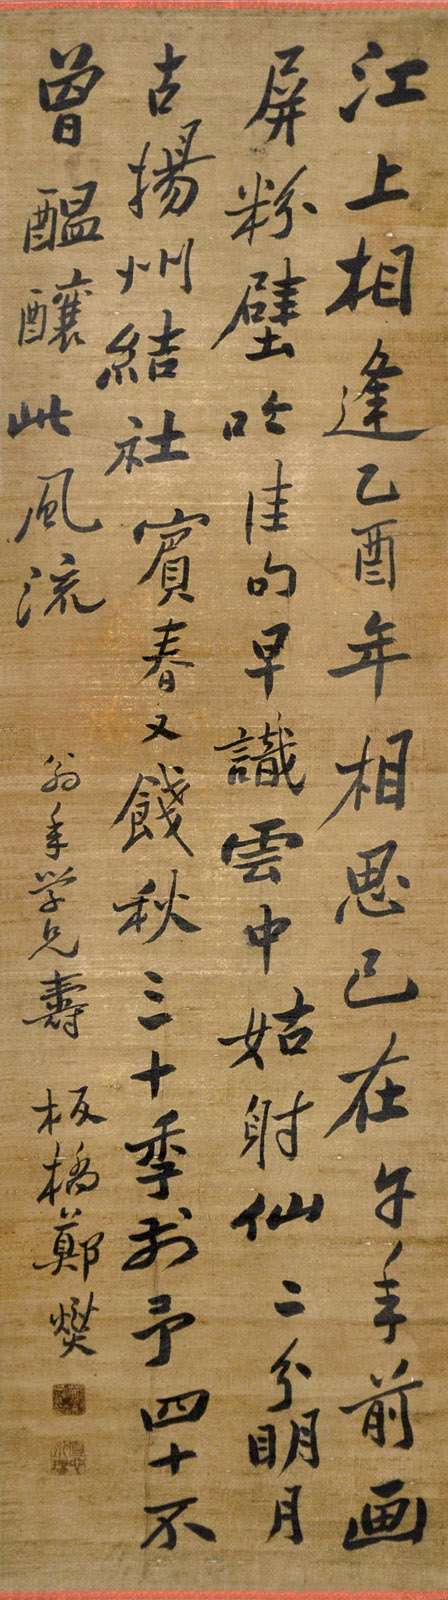 ? ?? (??) (1693 - 1765) ?????? Zheng Xie (Banqiao) Qing Dynasty Script Calligraphy of a Poem ? ??(